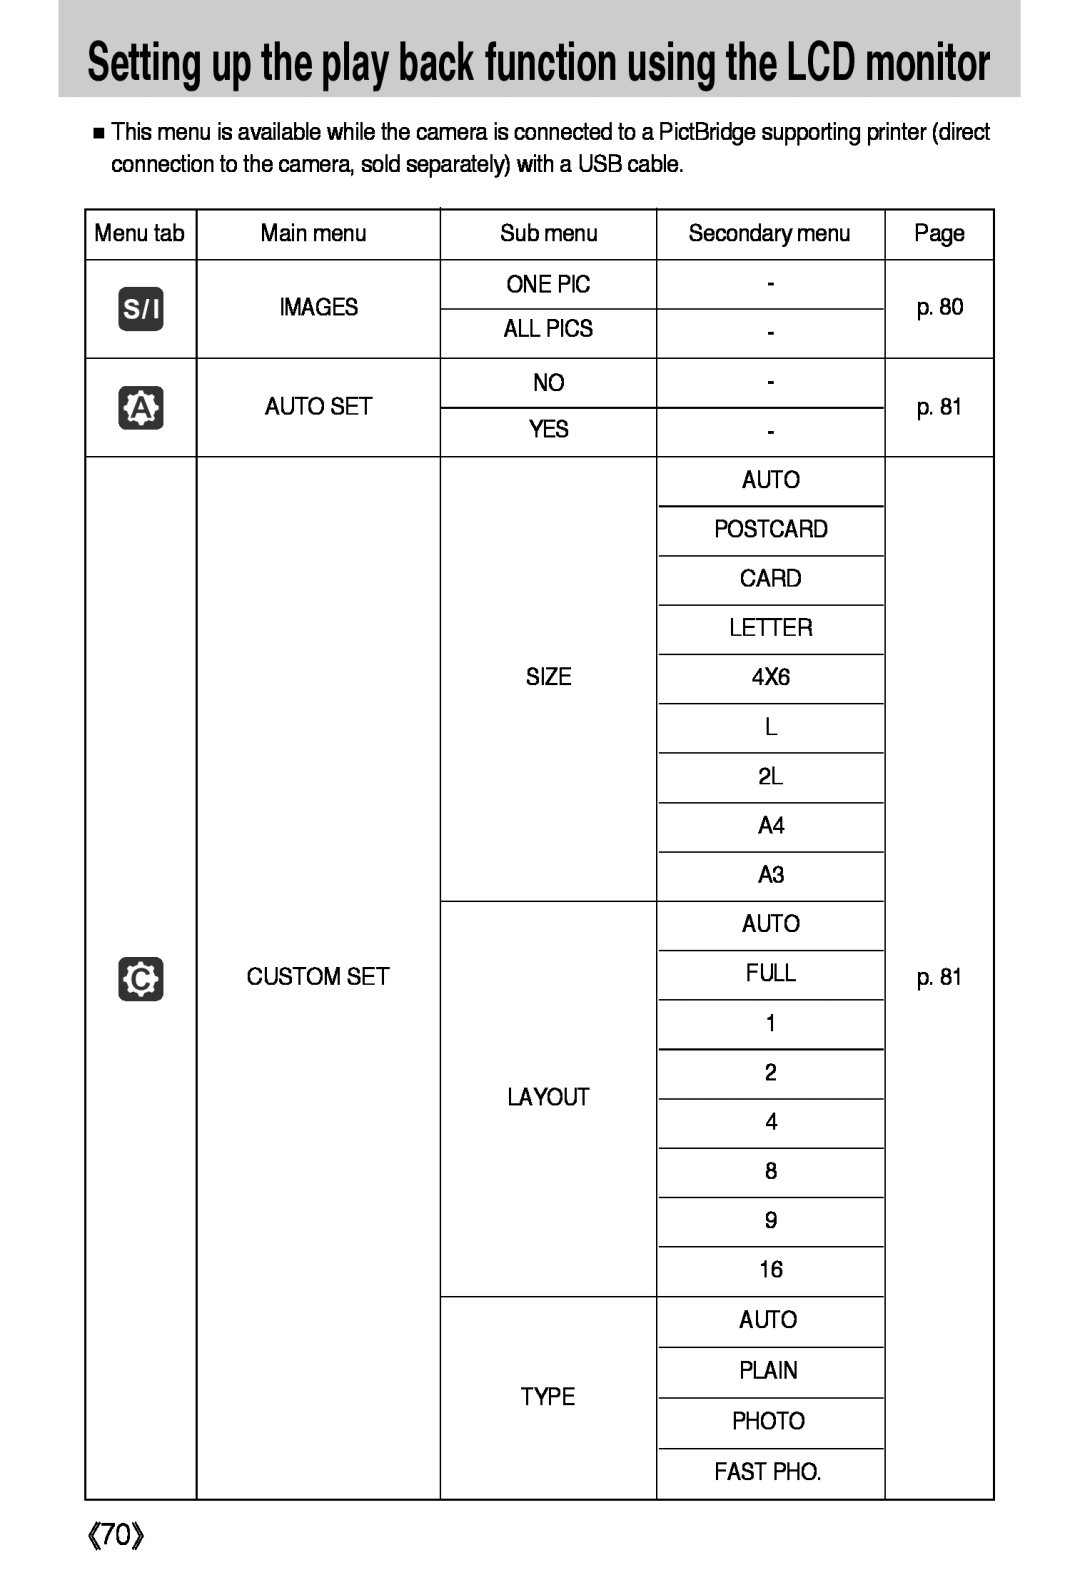 Samsung L50 user manual 《70》, Setting up the play back function using the LCD monitor, Card 